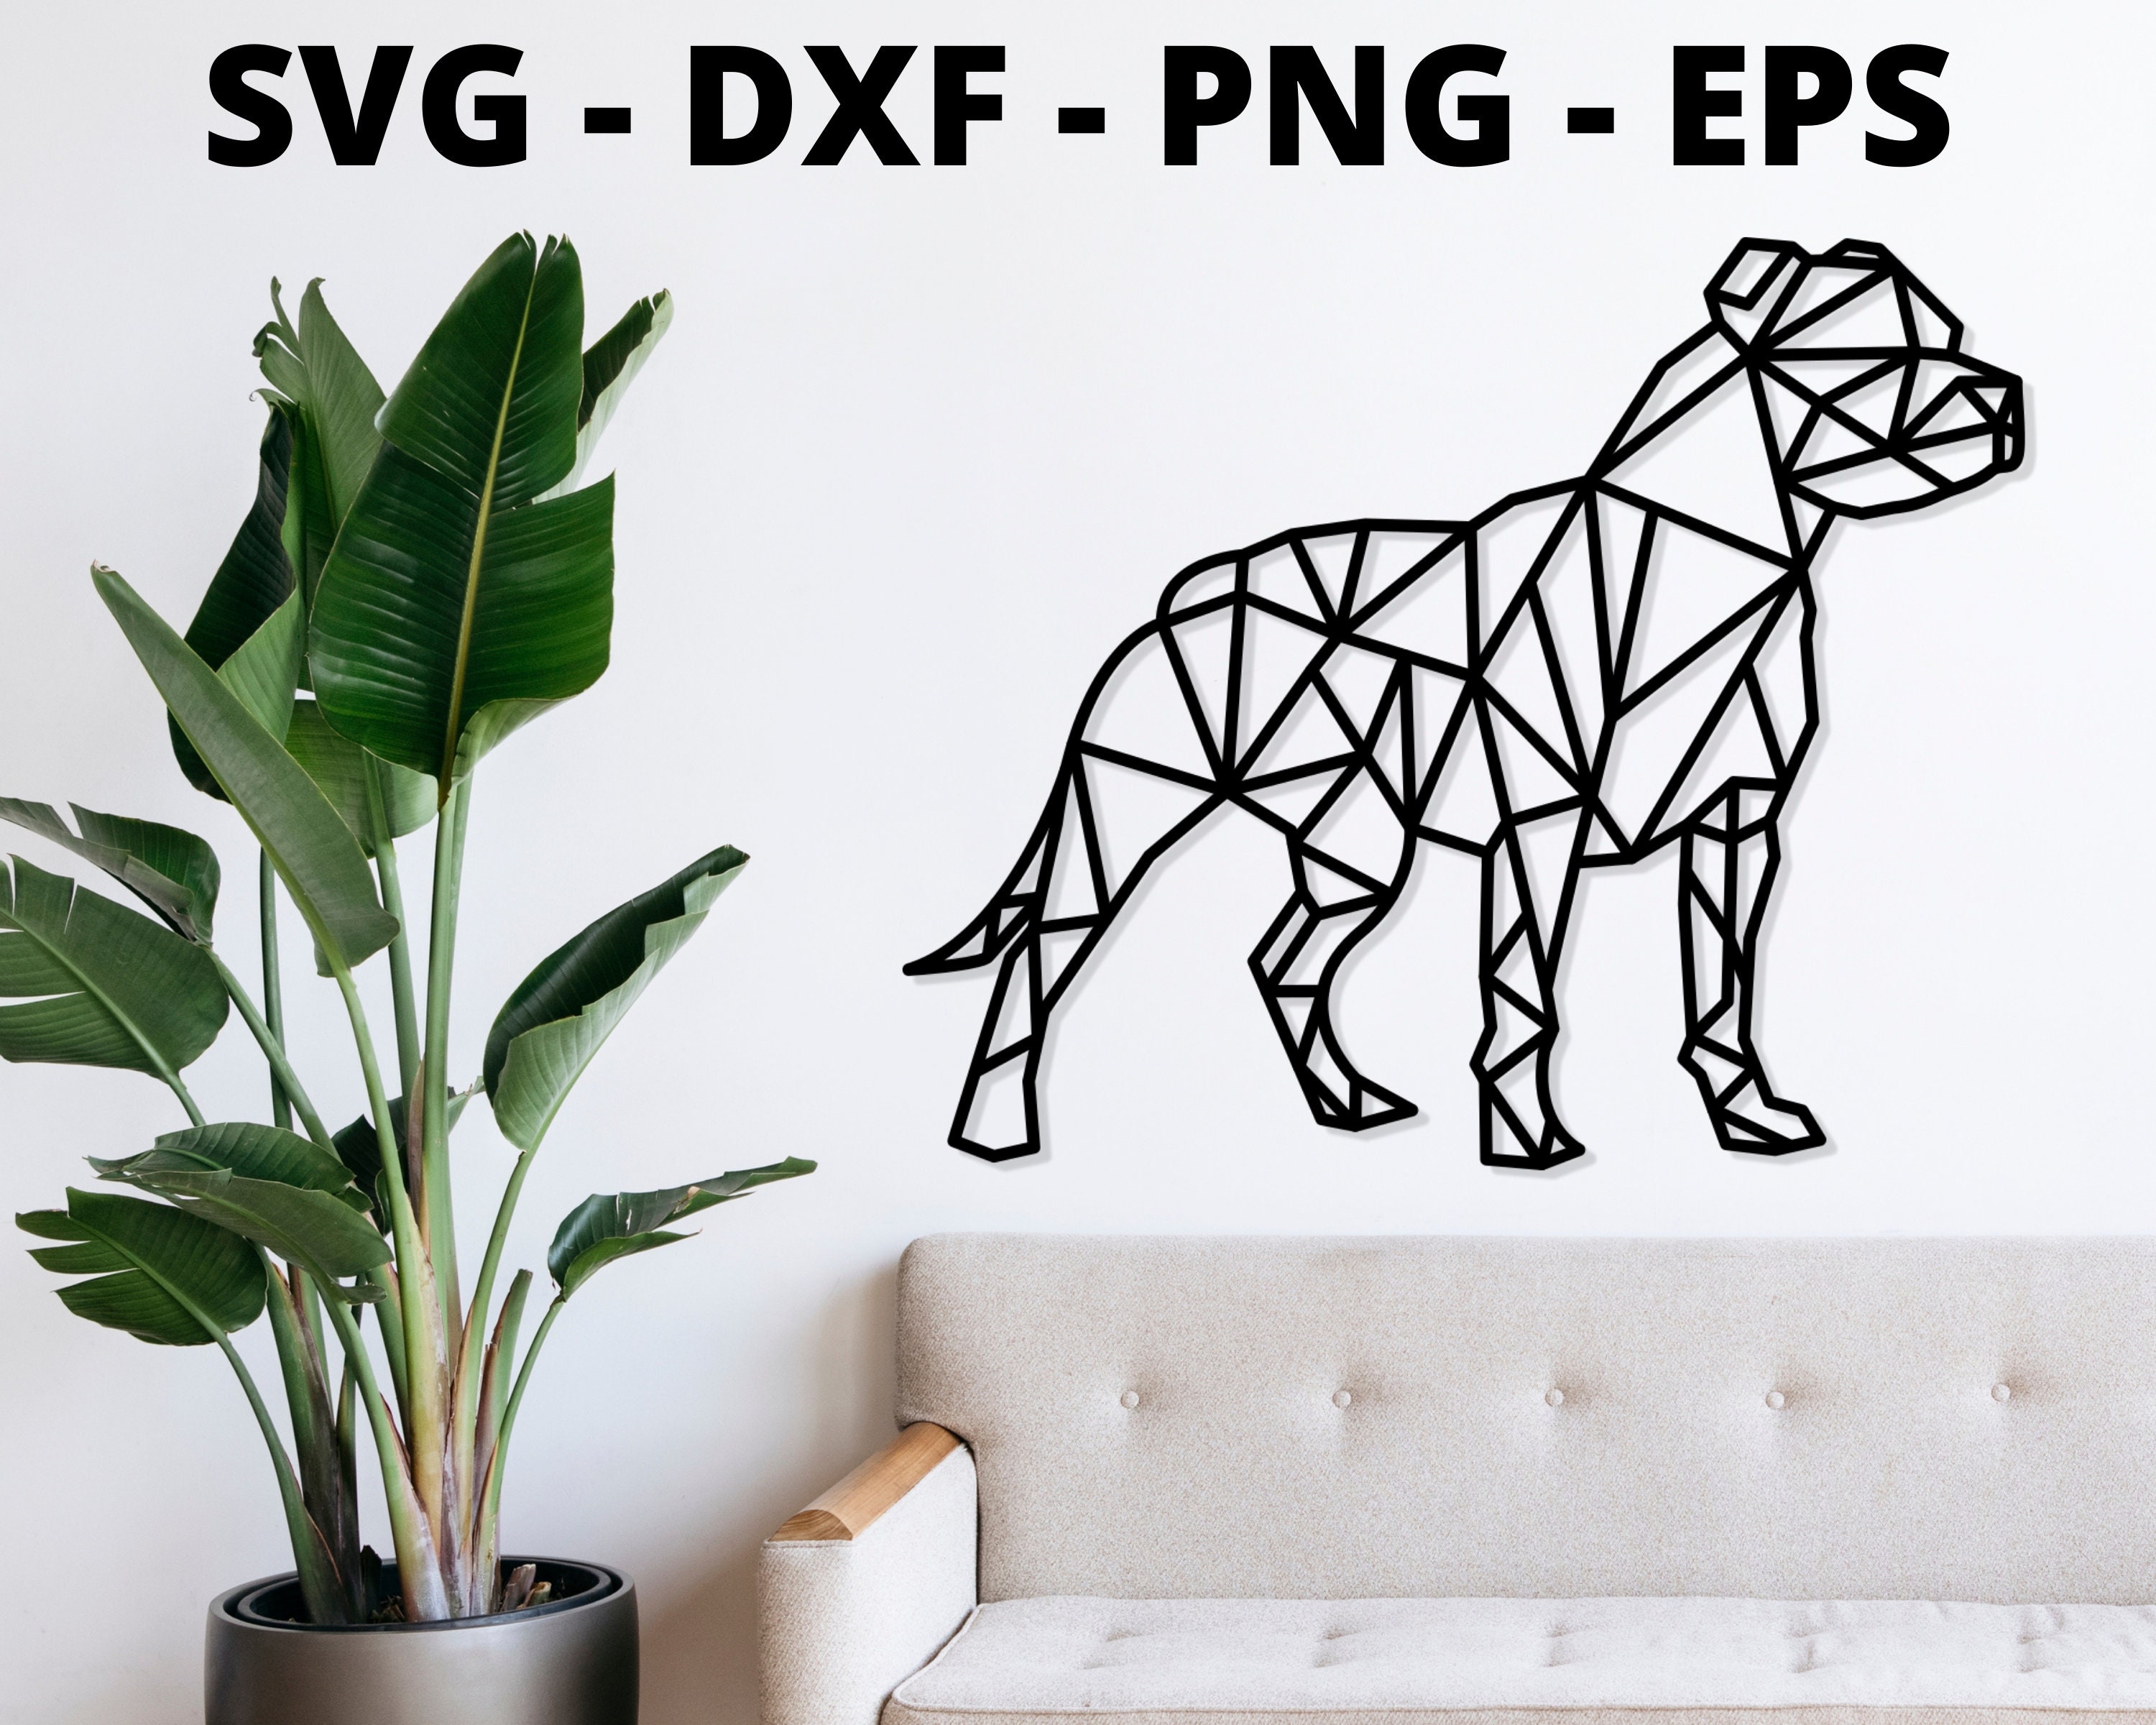 Buy Dog SVG DXF PNG Eps Staffordshire Bull Terrier Breed Online in